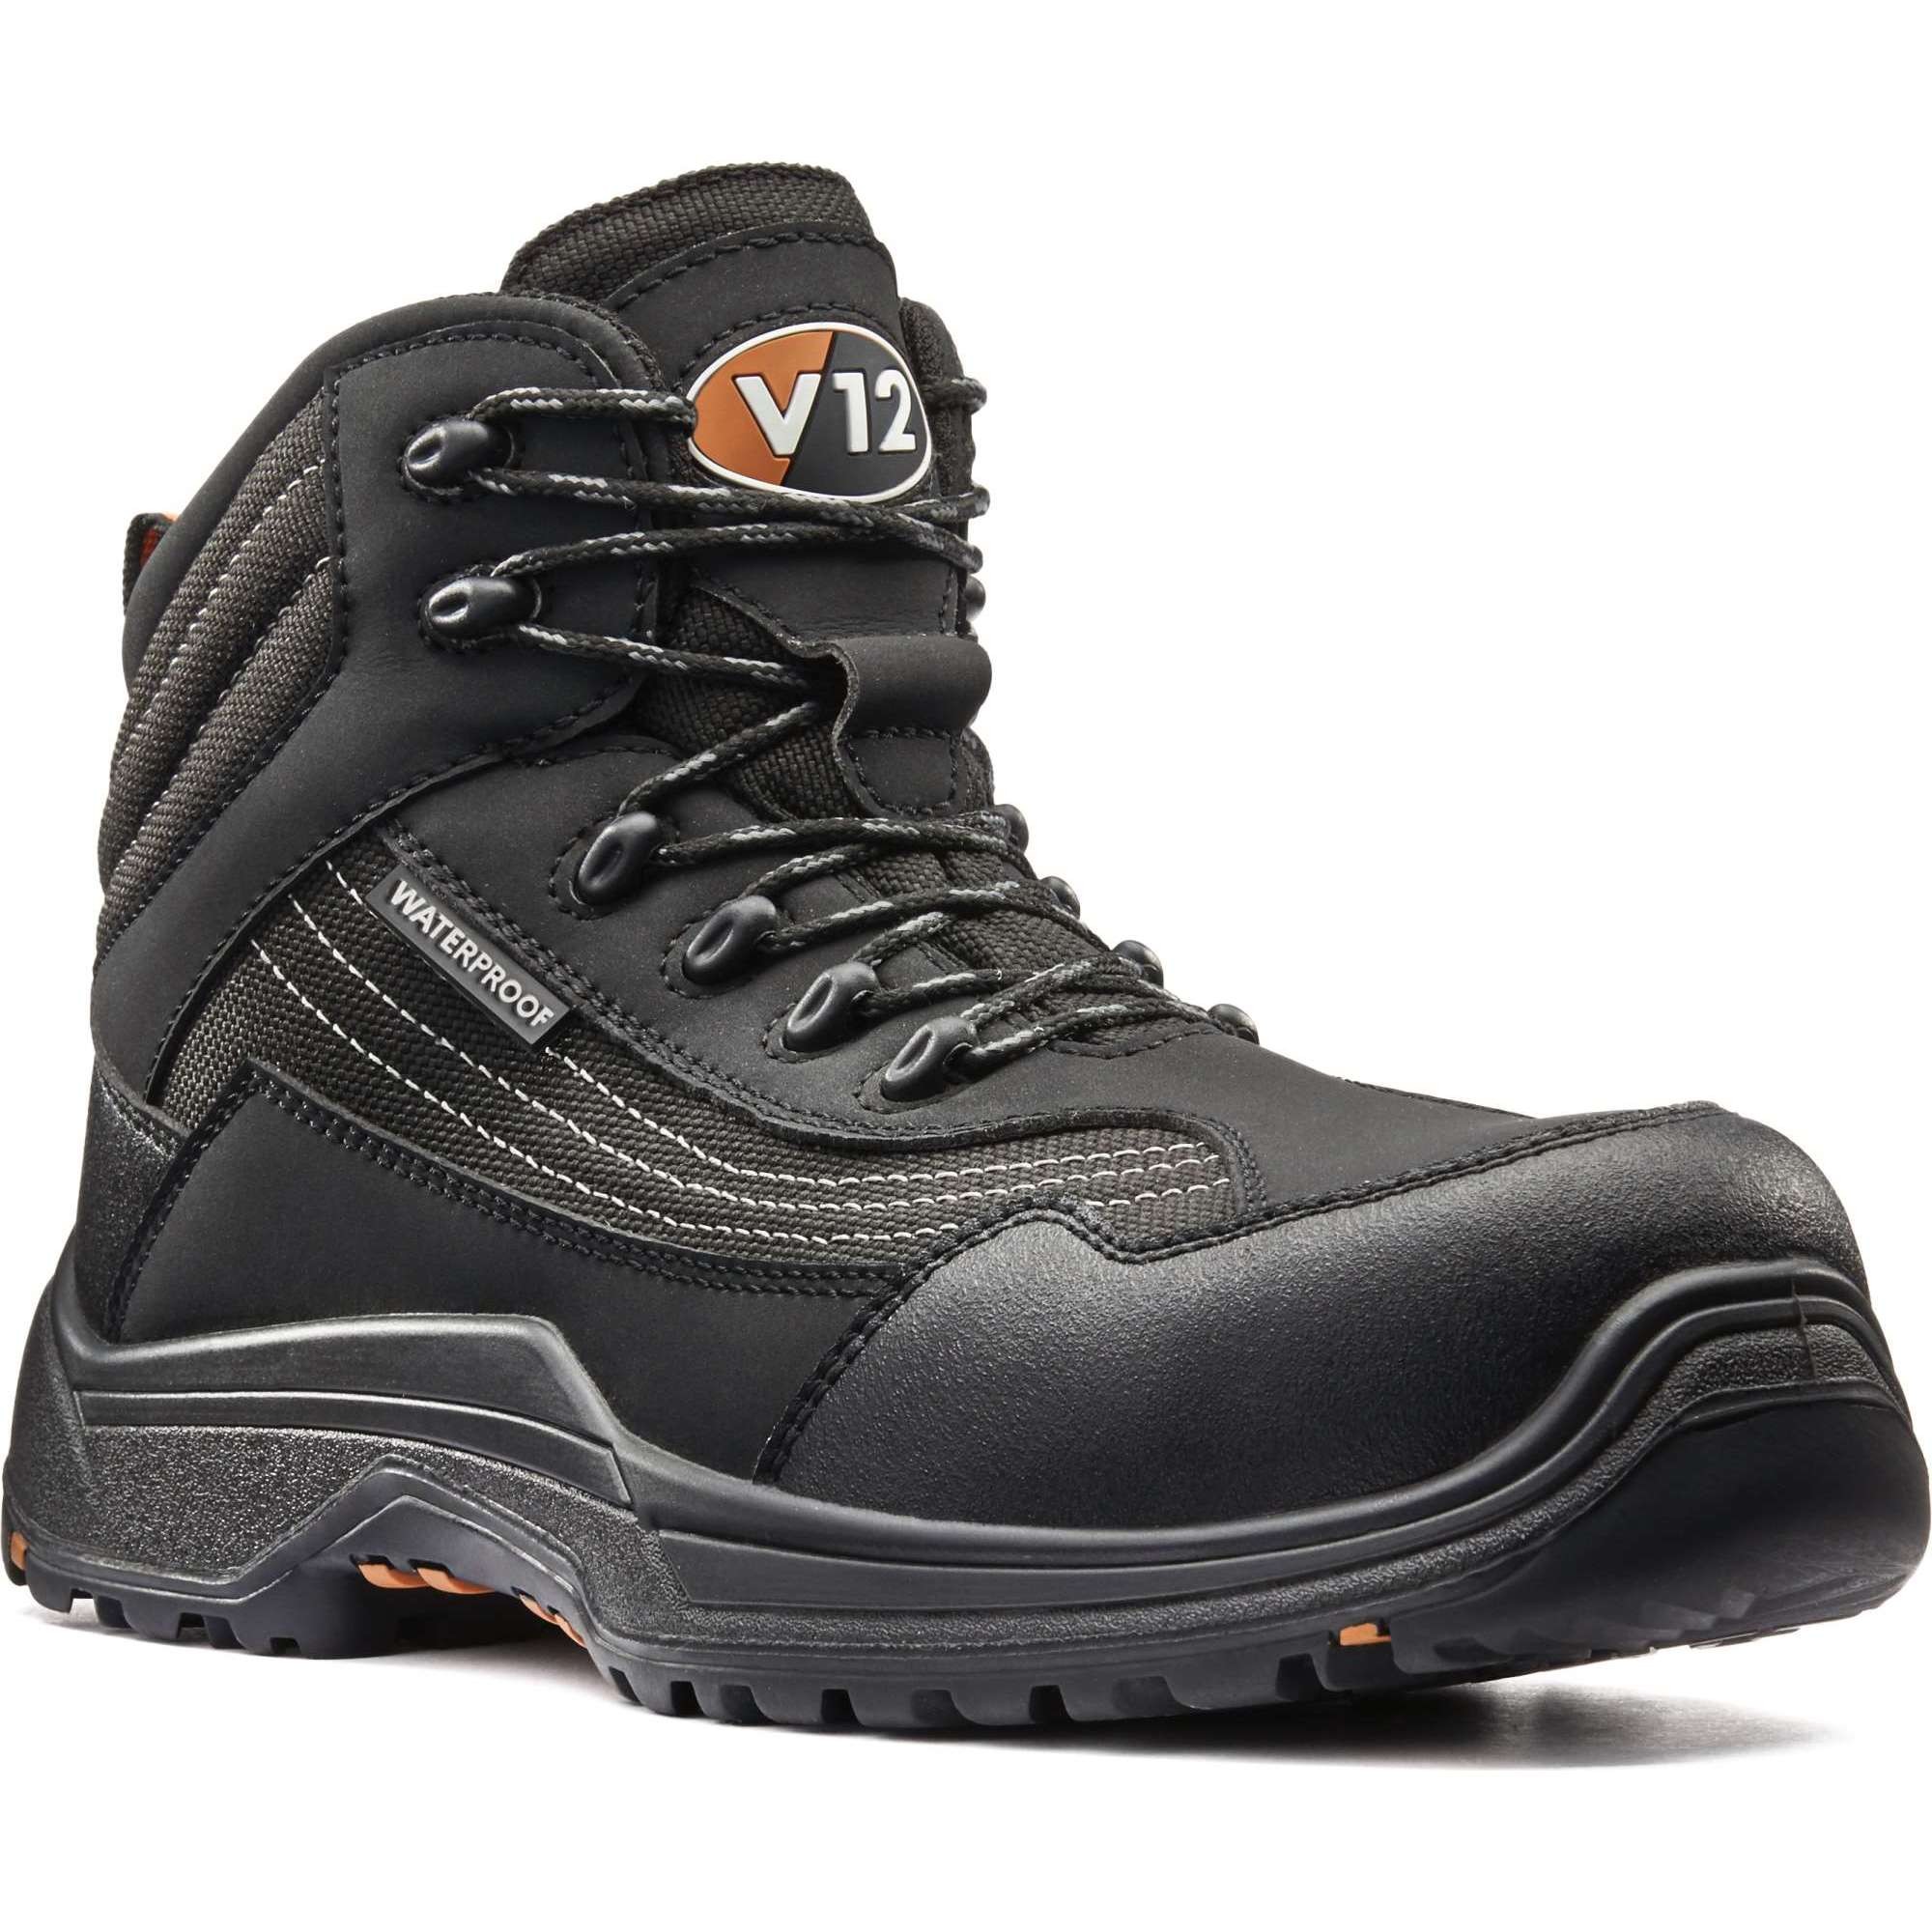 V12 Caiman IGS S3 Safety Boot